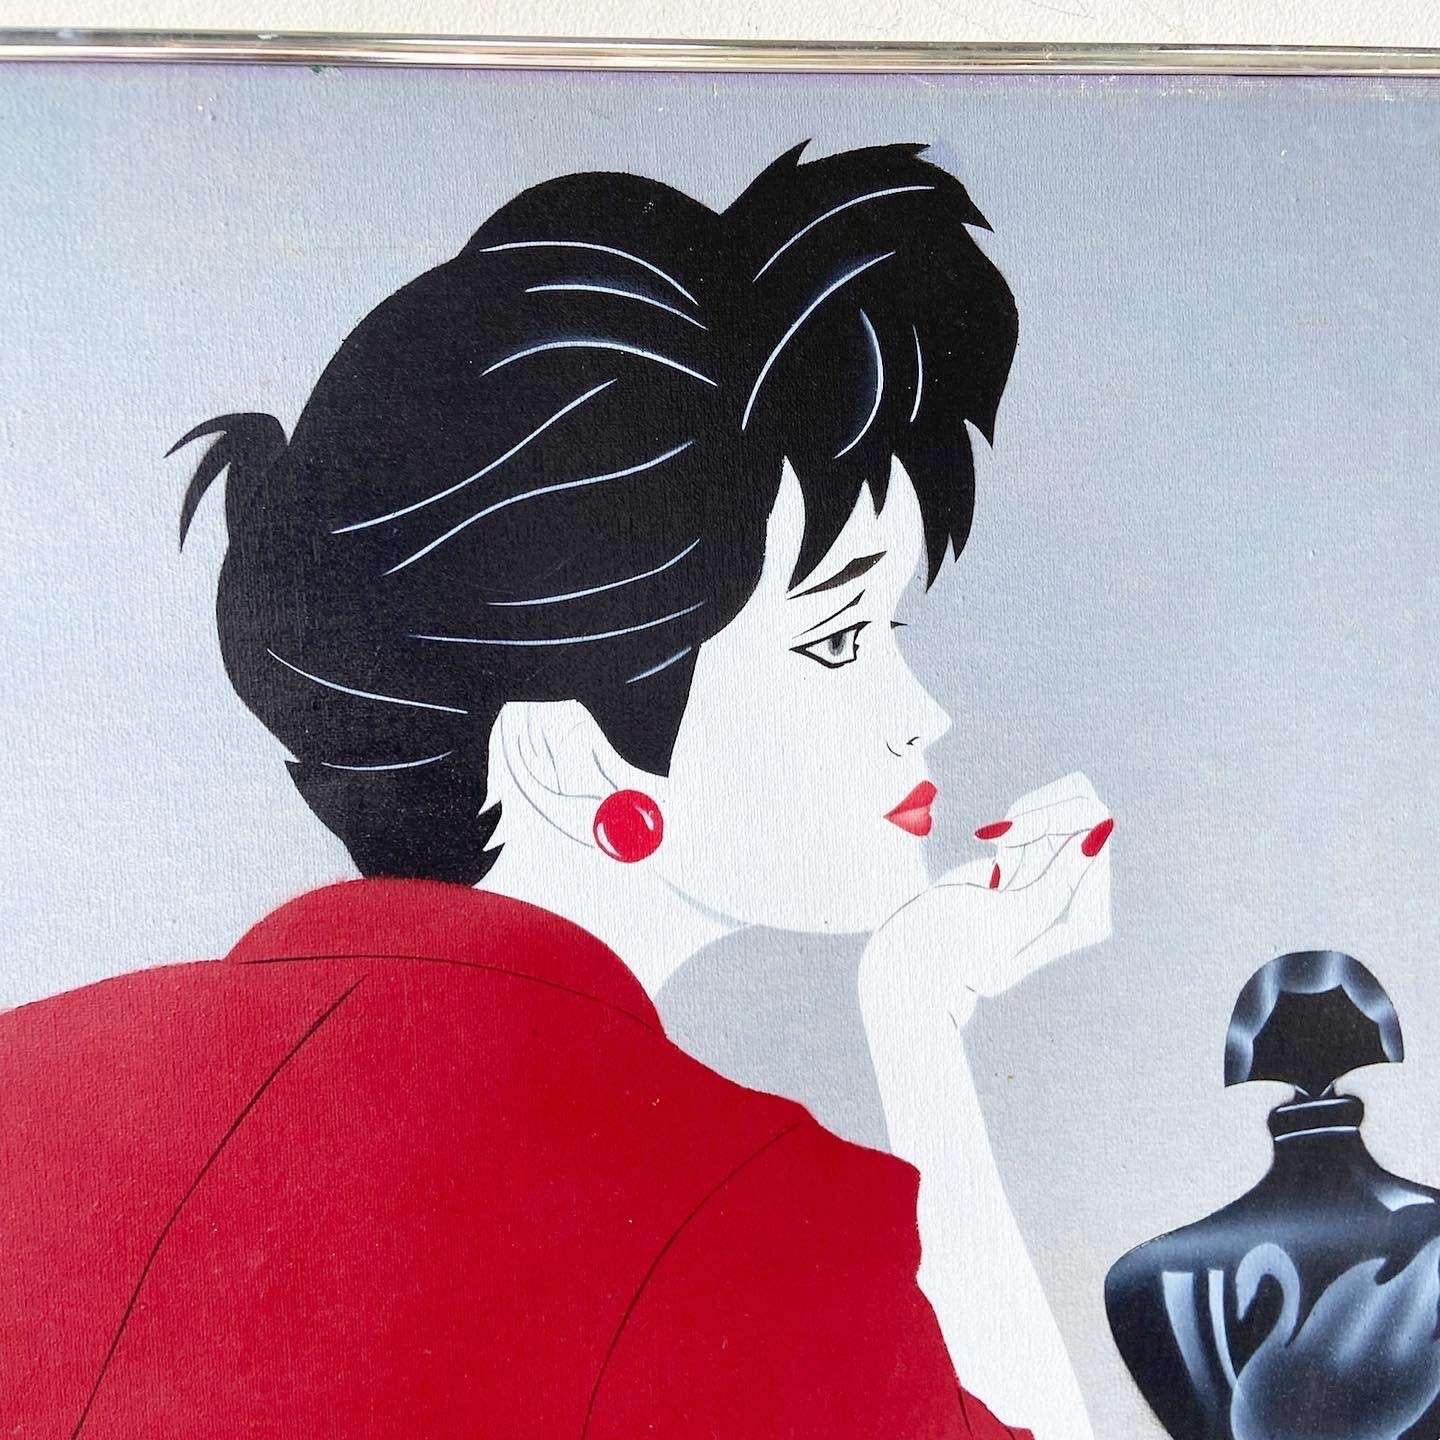 Add a splash of Art Deco glamour to your space with our Oil Painting Reproduction of “Suzanne” by Robert Blue, Nagel Style. This exceptional vintage 1980s piece recreates the iconic aesthetic of Patrick Nagel with a twist. The painting depicts a